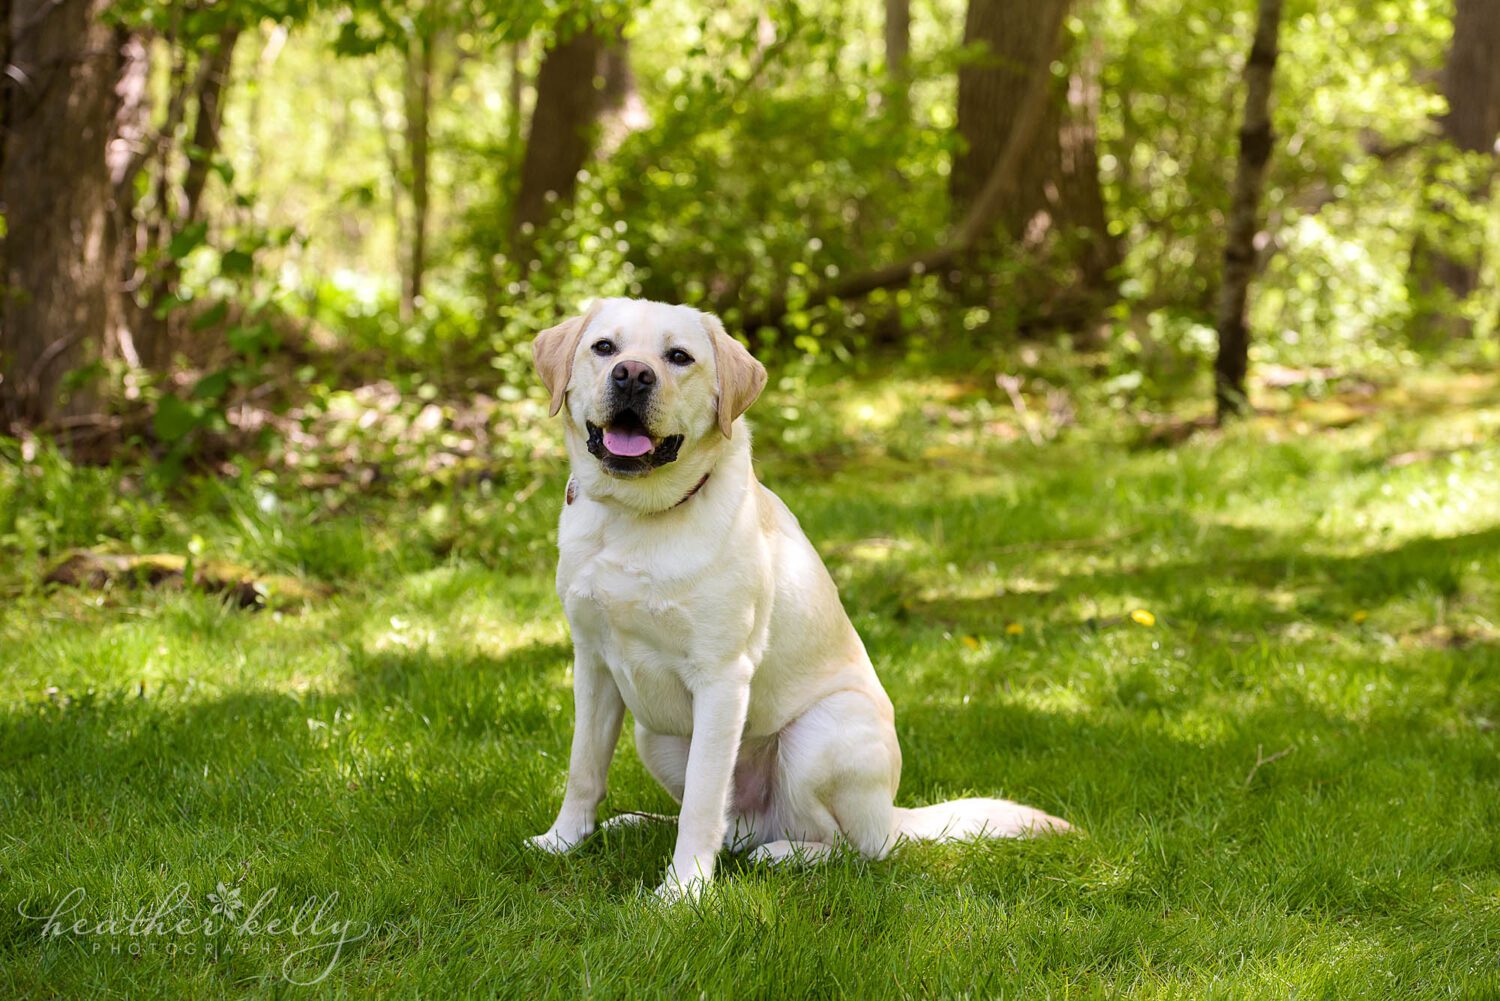 A photo of a yellow lab who is a service dog in training. He is outside on lush green grass, staring into the camera.